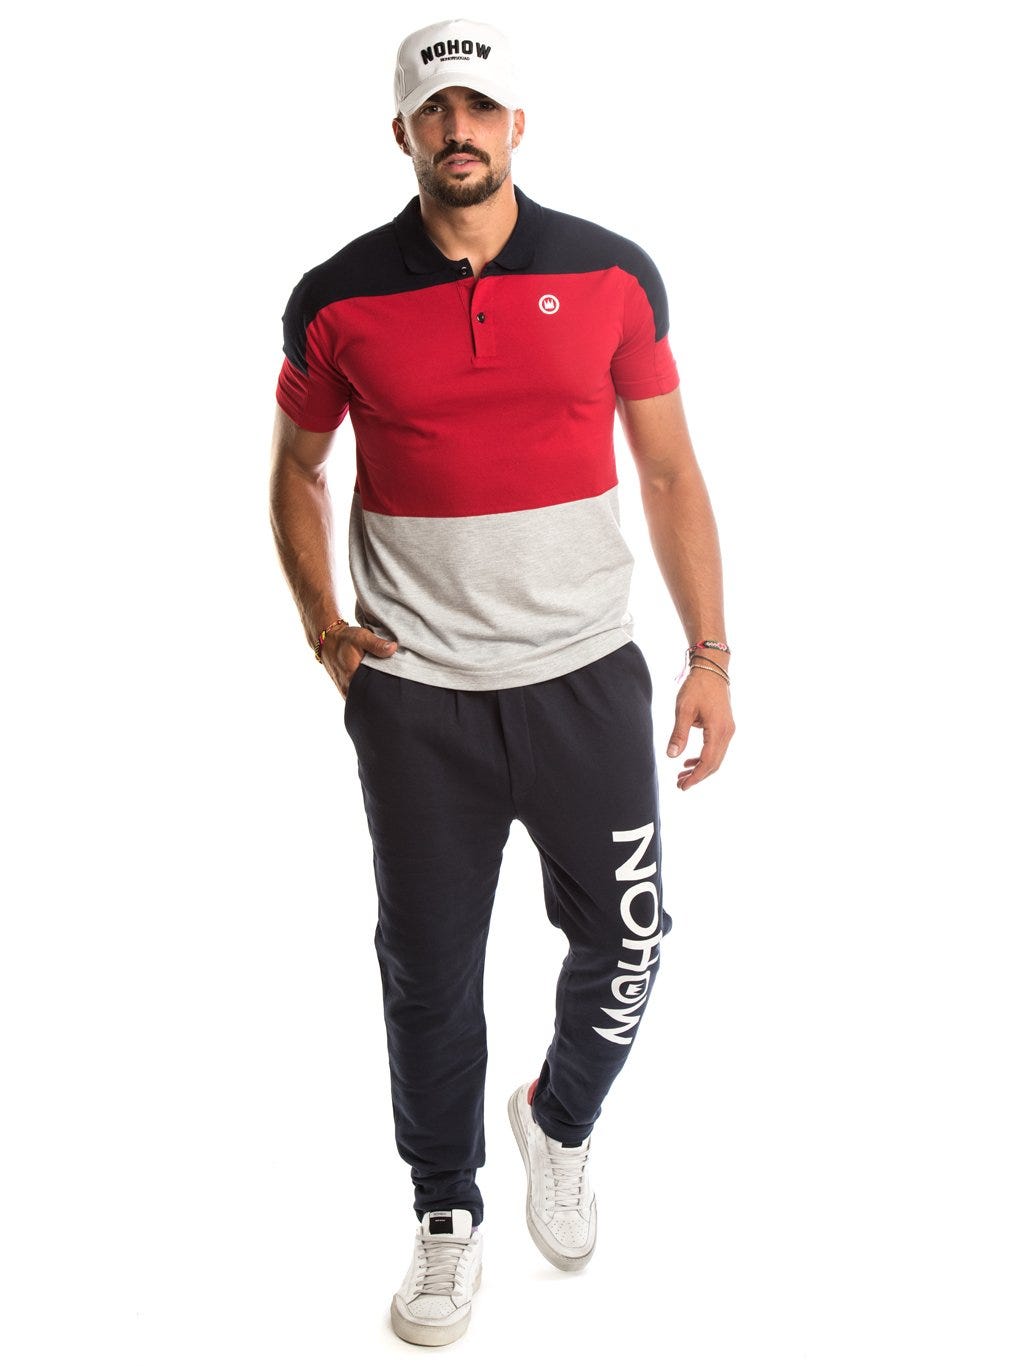 EDWARD COTTON POLO IN BLACK, RED AND GREY